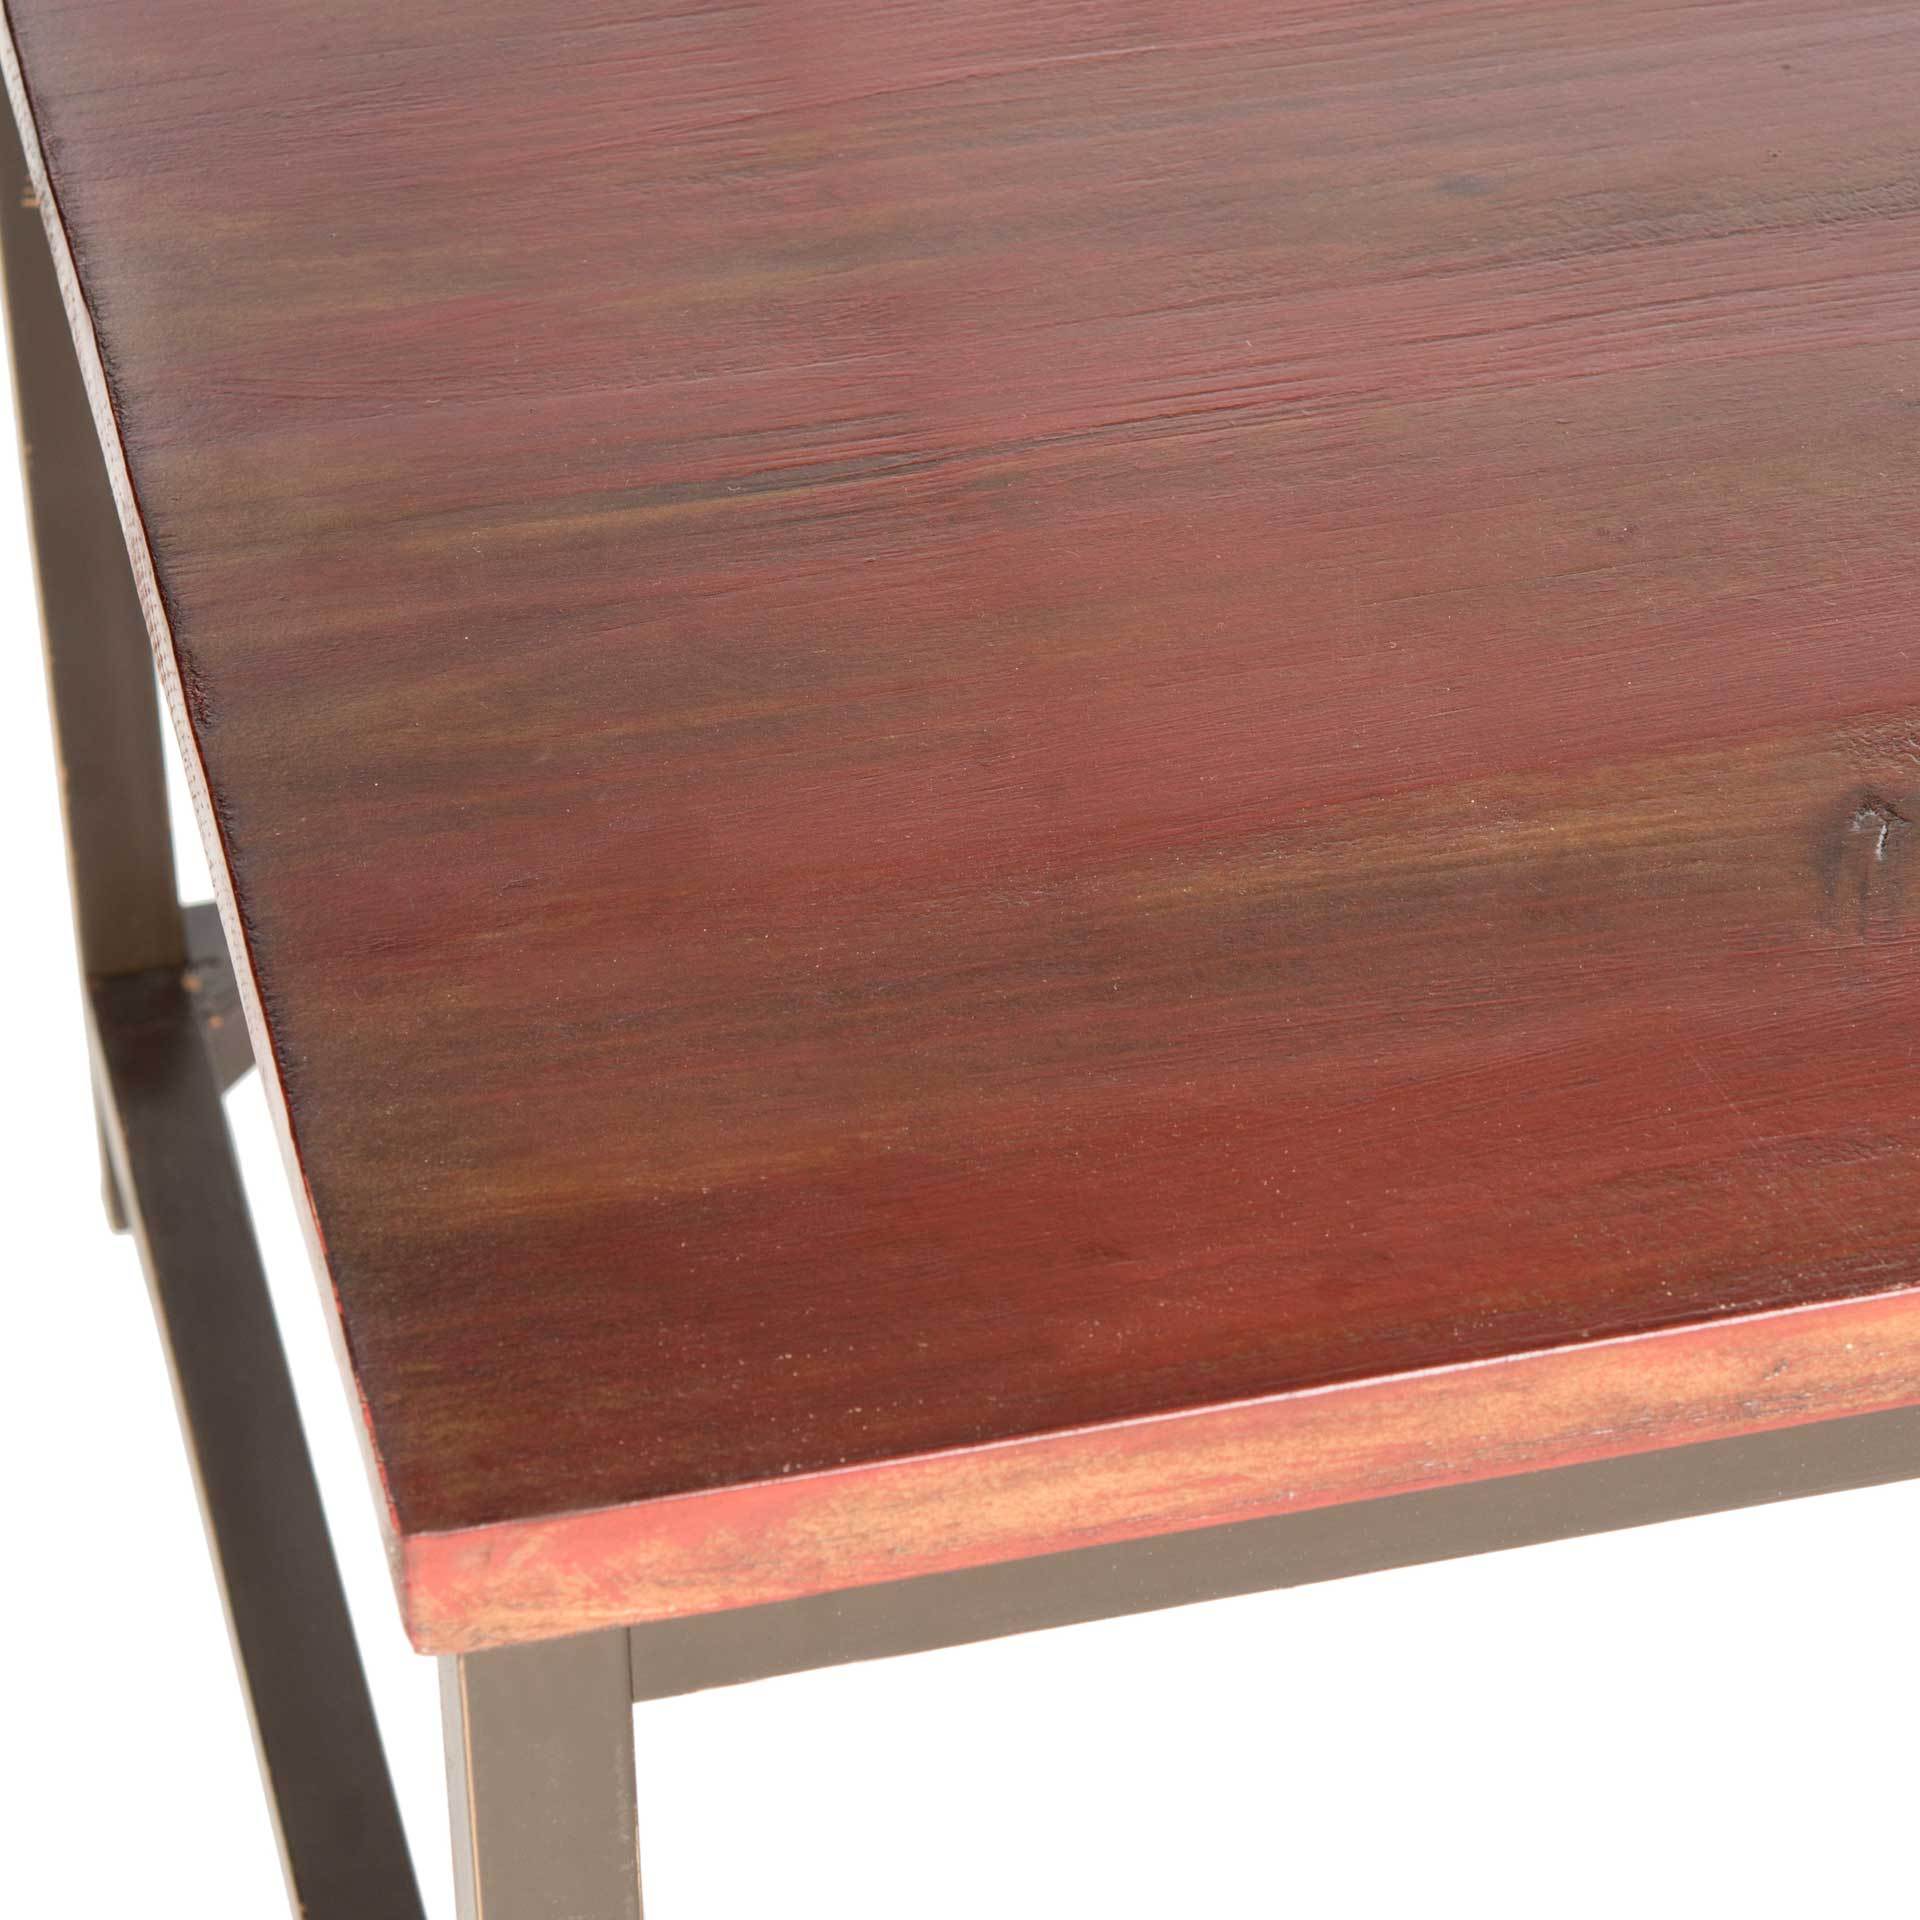 Alex Coffee Table Distressed Red Barn